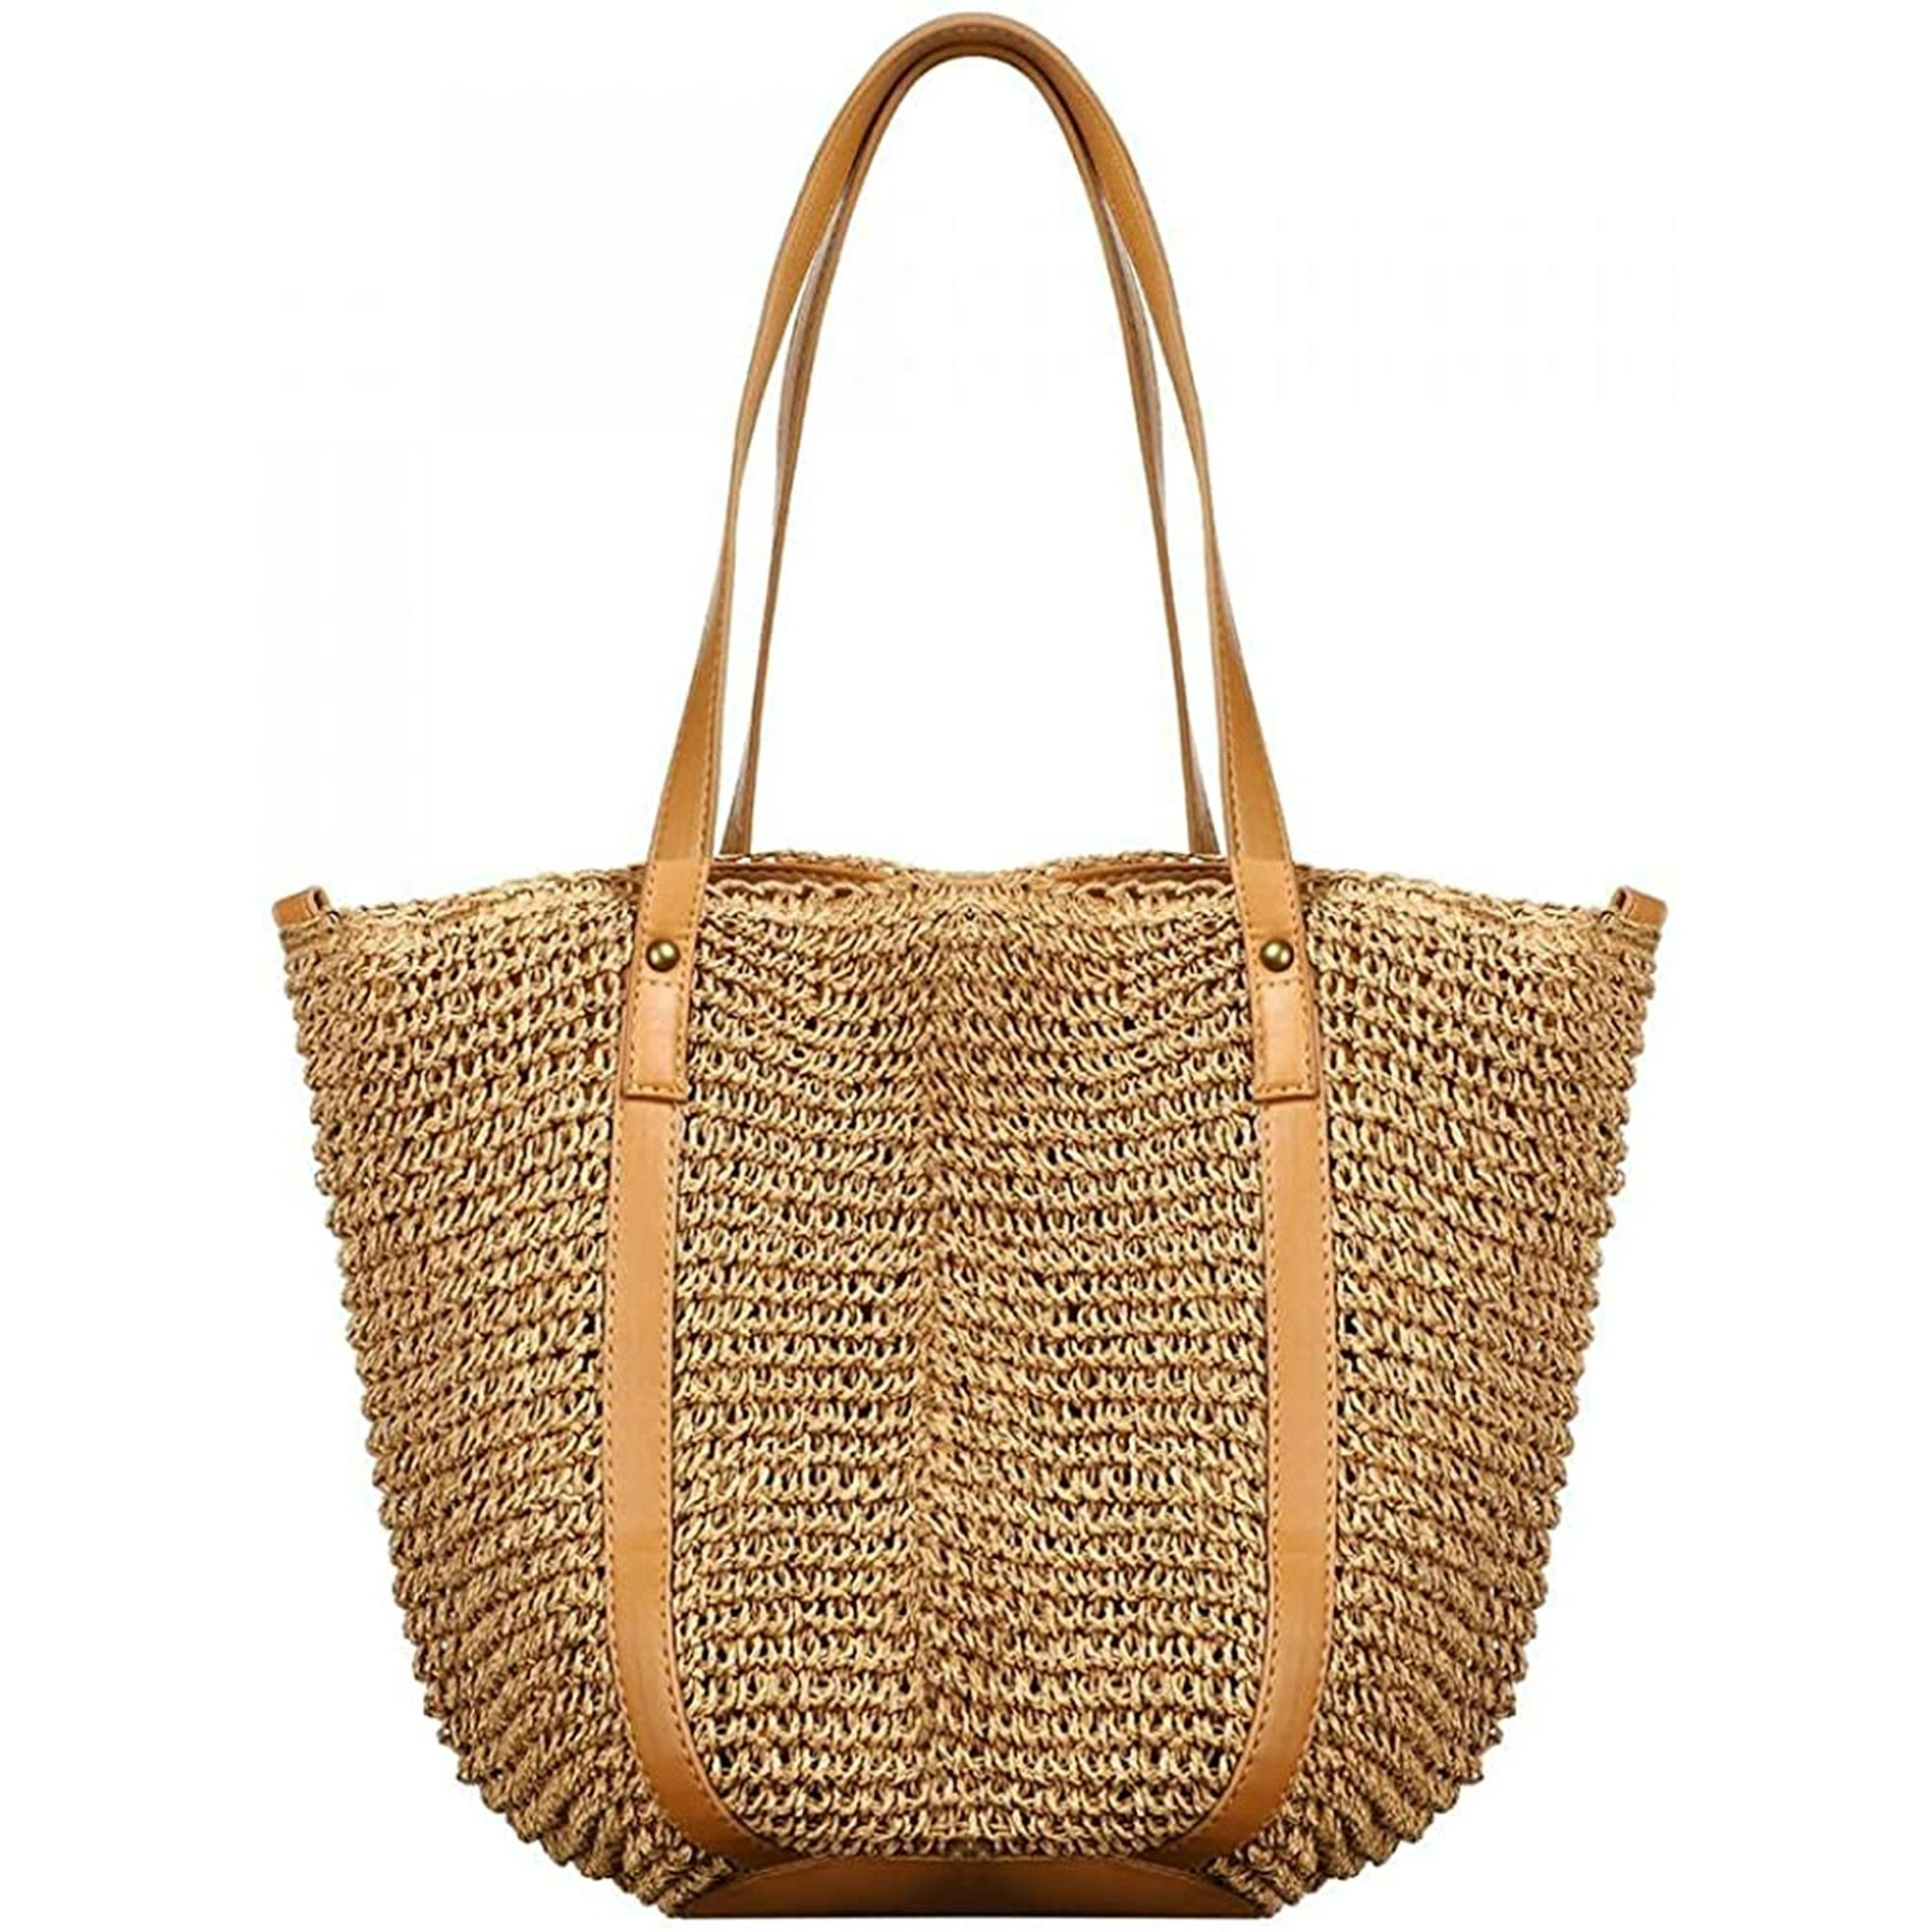 Stay Cool and Stylish with Straw Handbags for Summer